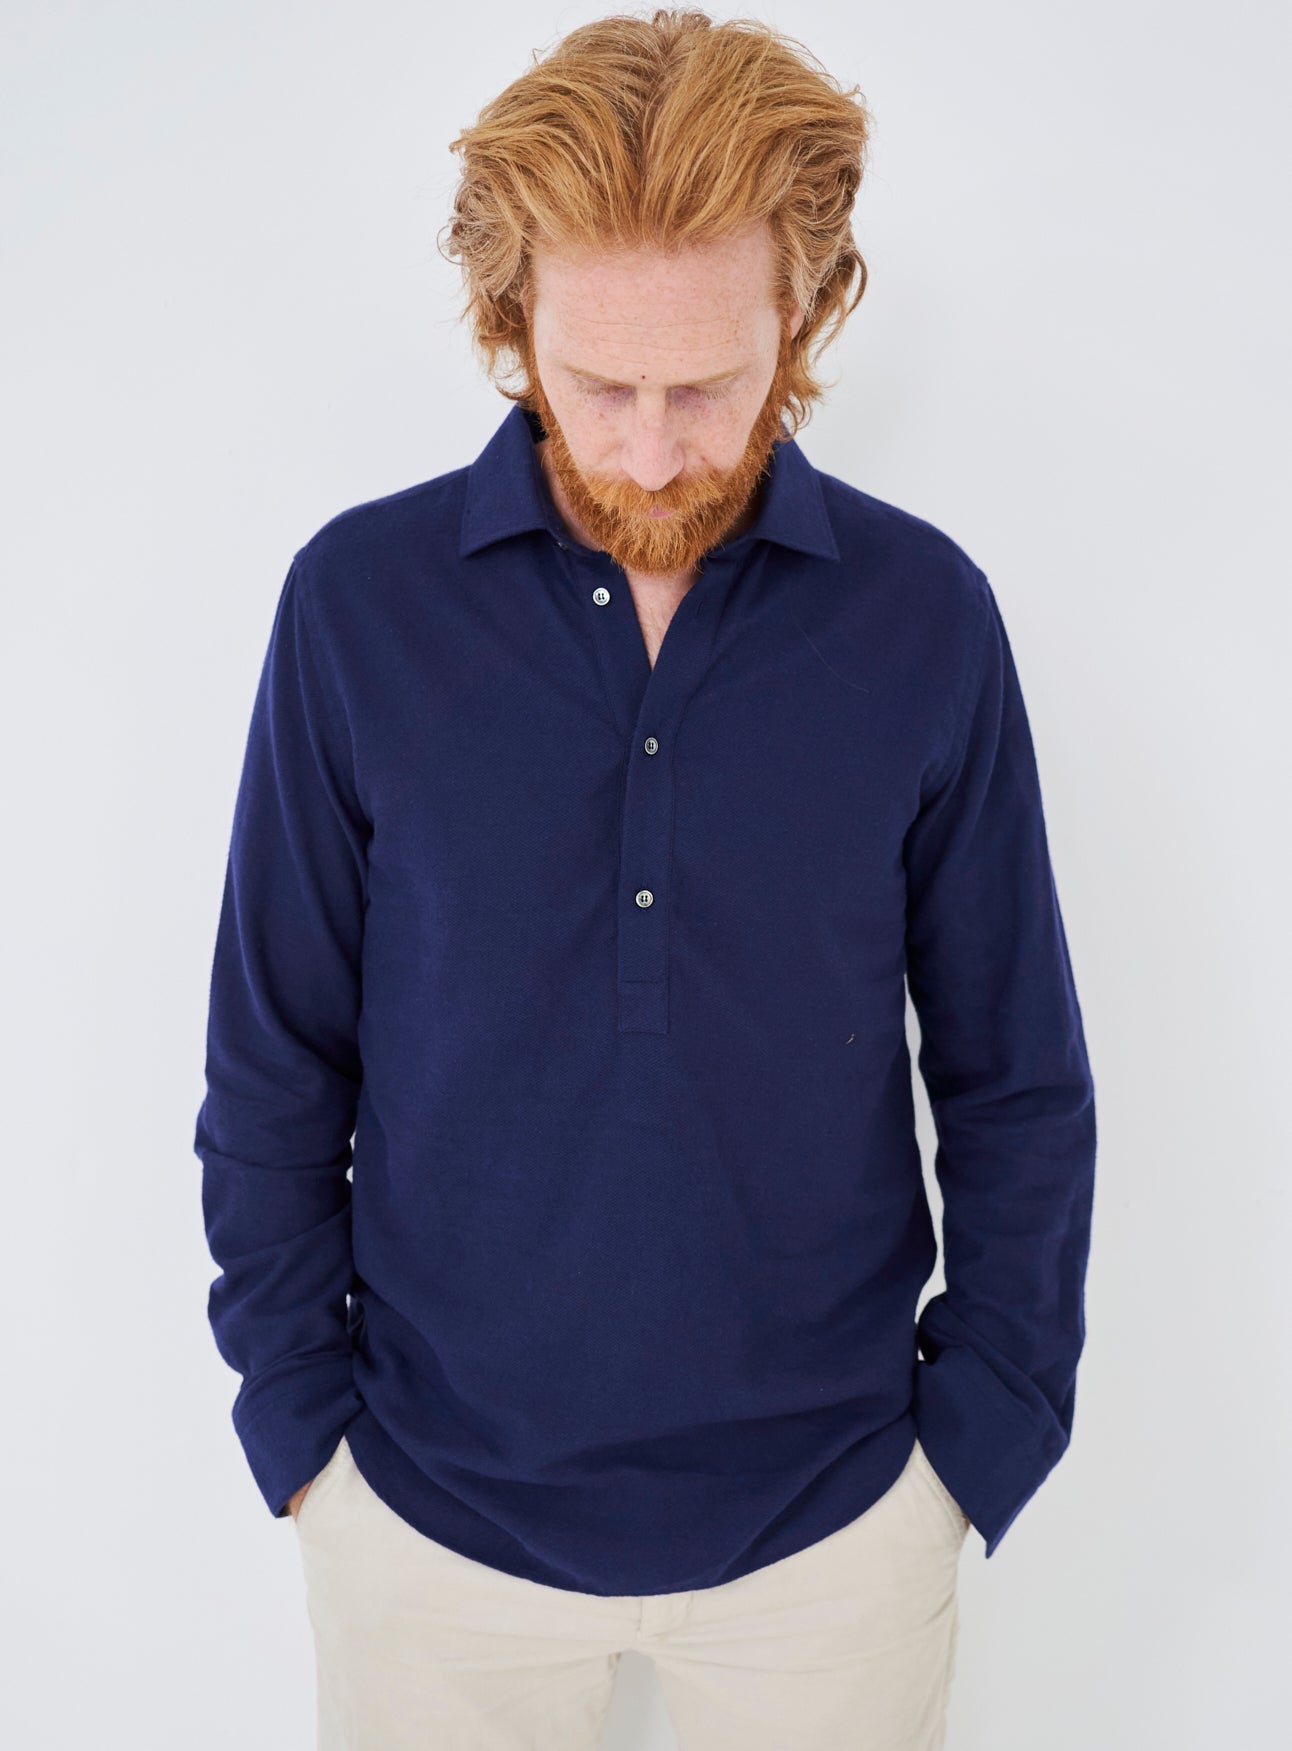 popover shirt, sustainable clothing